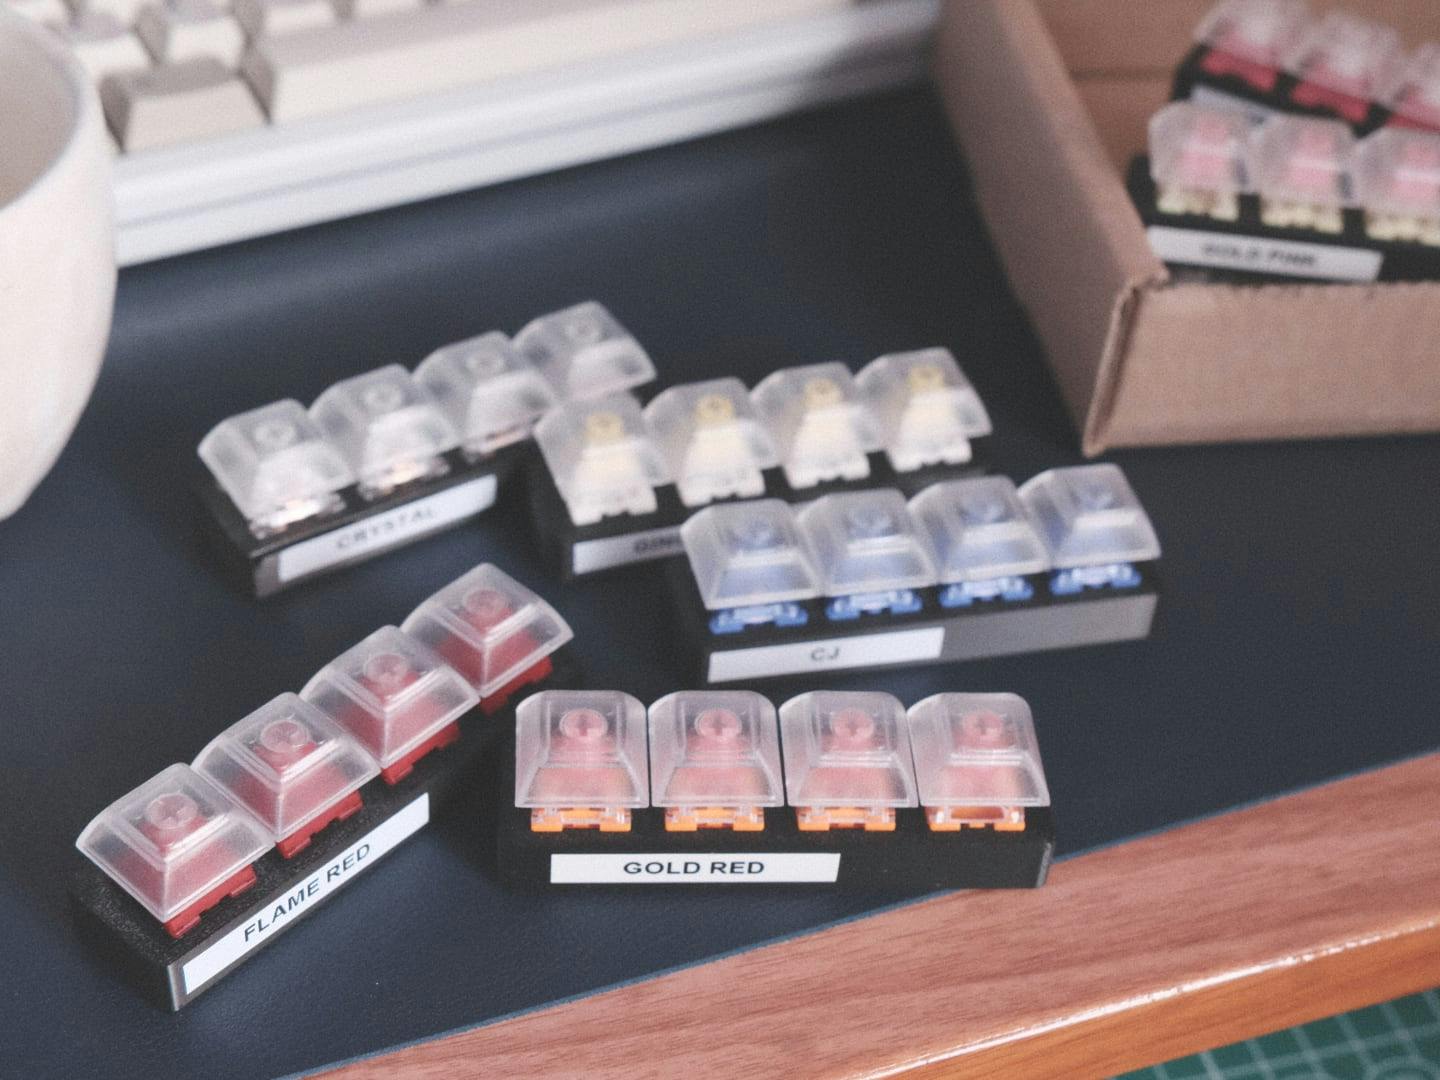 View of many Milktooth switch testers and a box in the background